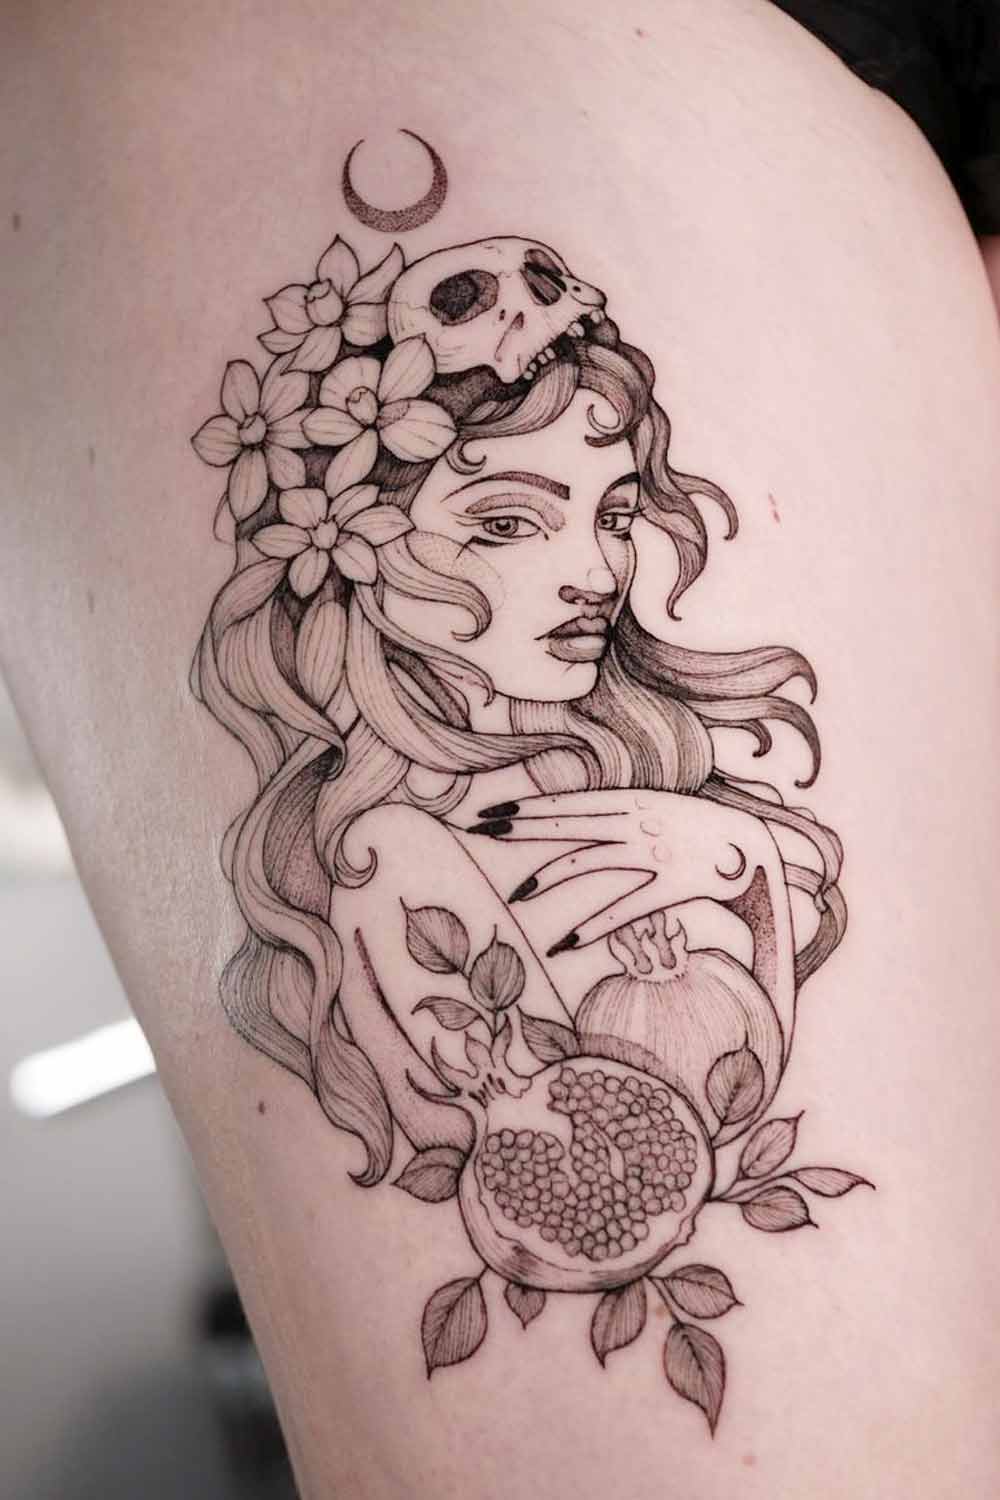 Woman Portrait Design for Thigh Tattoo